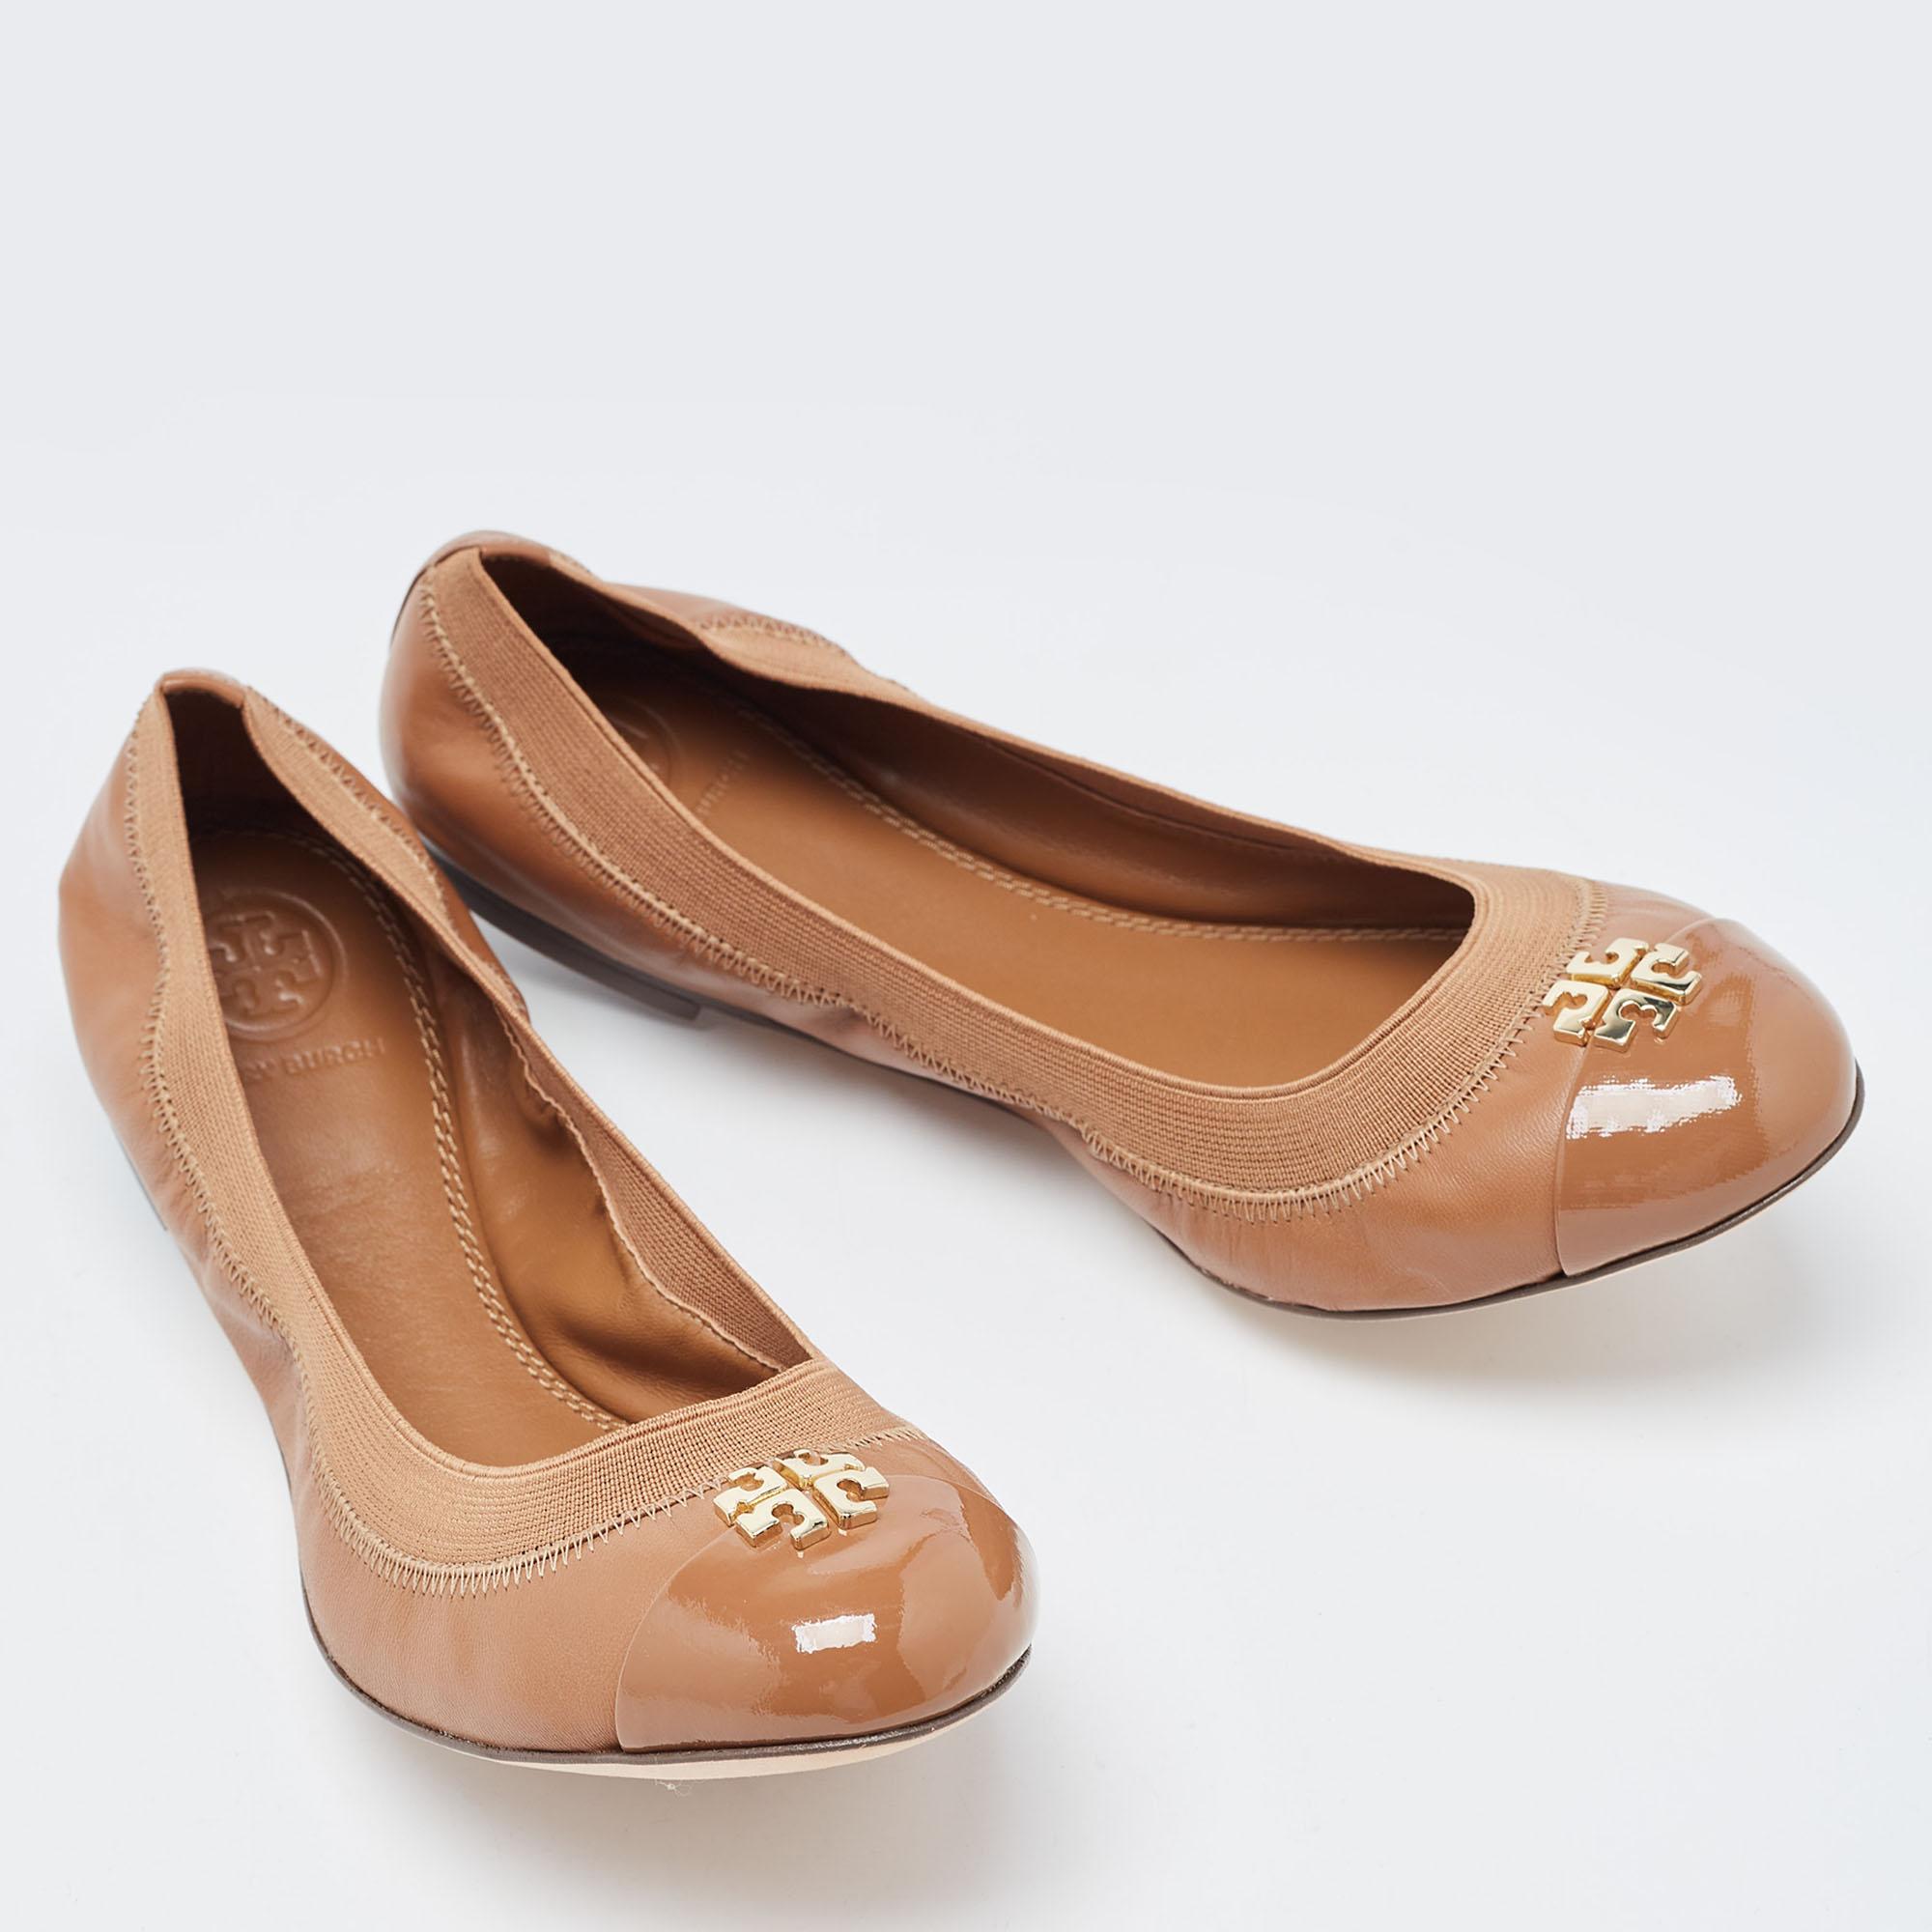 Tory Burch Brown Patent and Leather Jolie Scrunch Ballet Flats Size 39.5 1